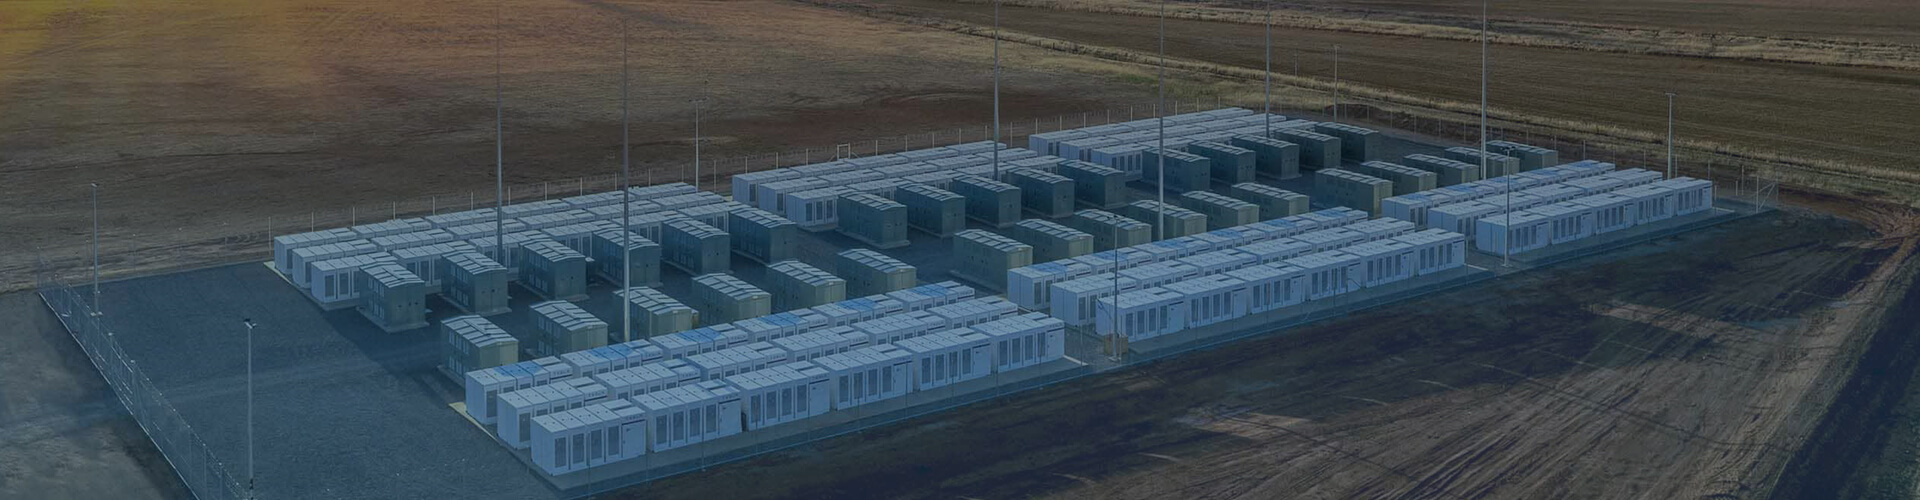 World’s largest grid battery to be built in South Australia